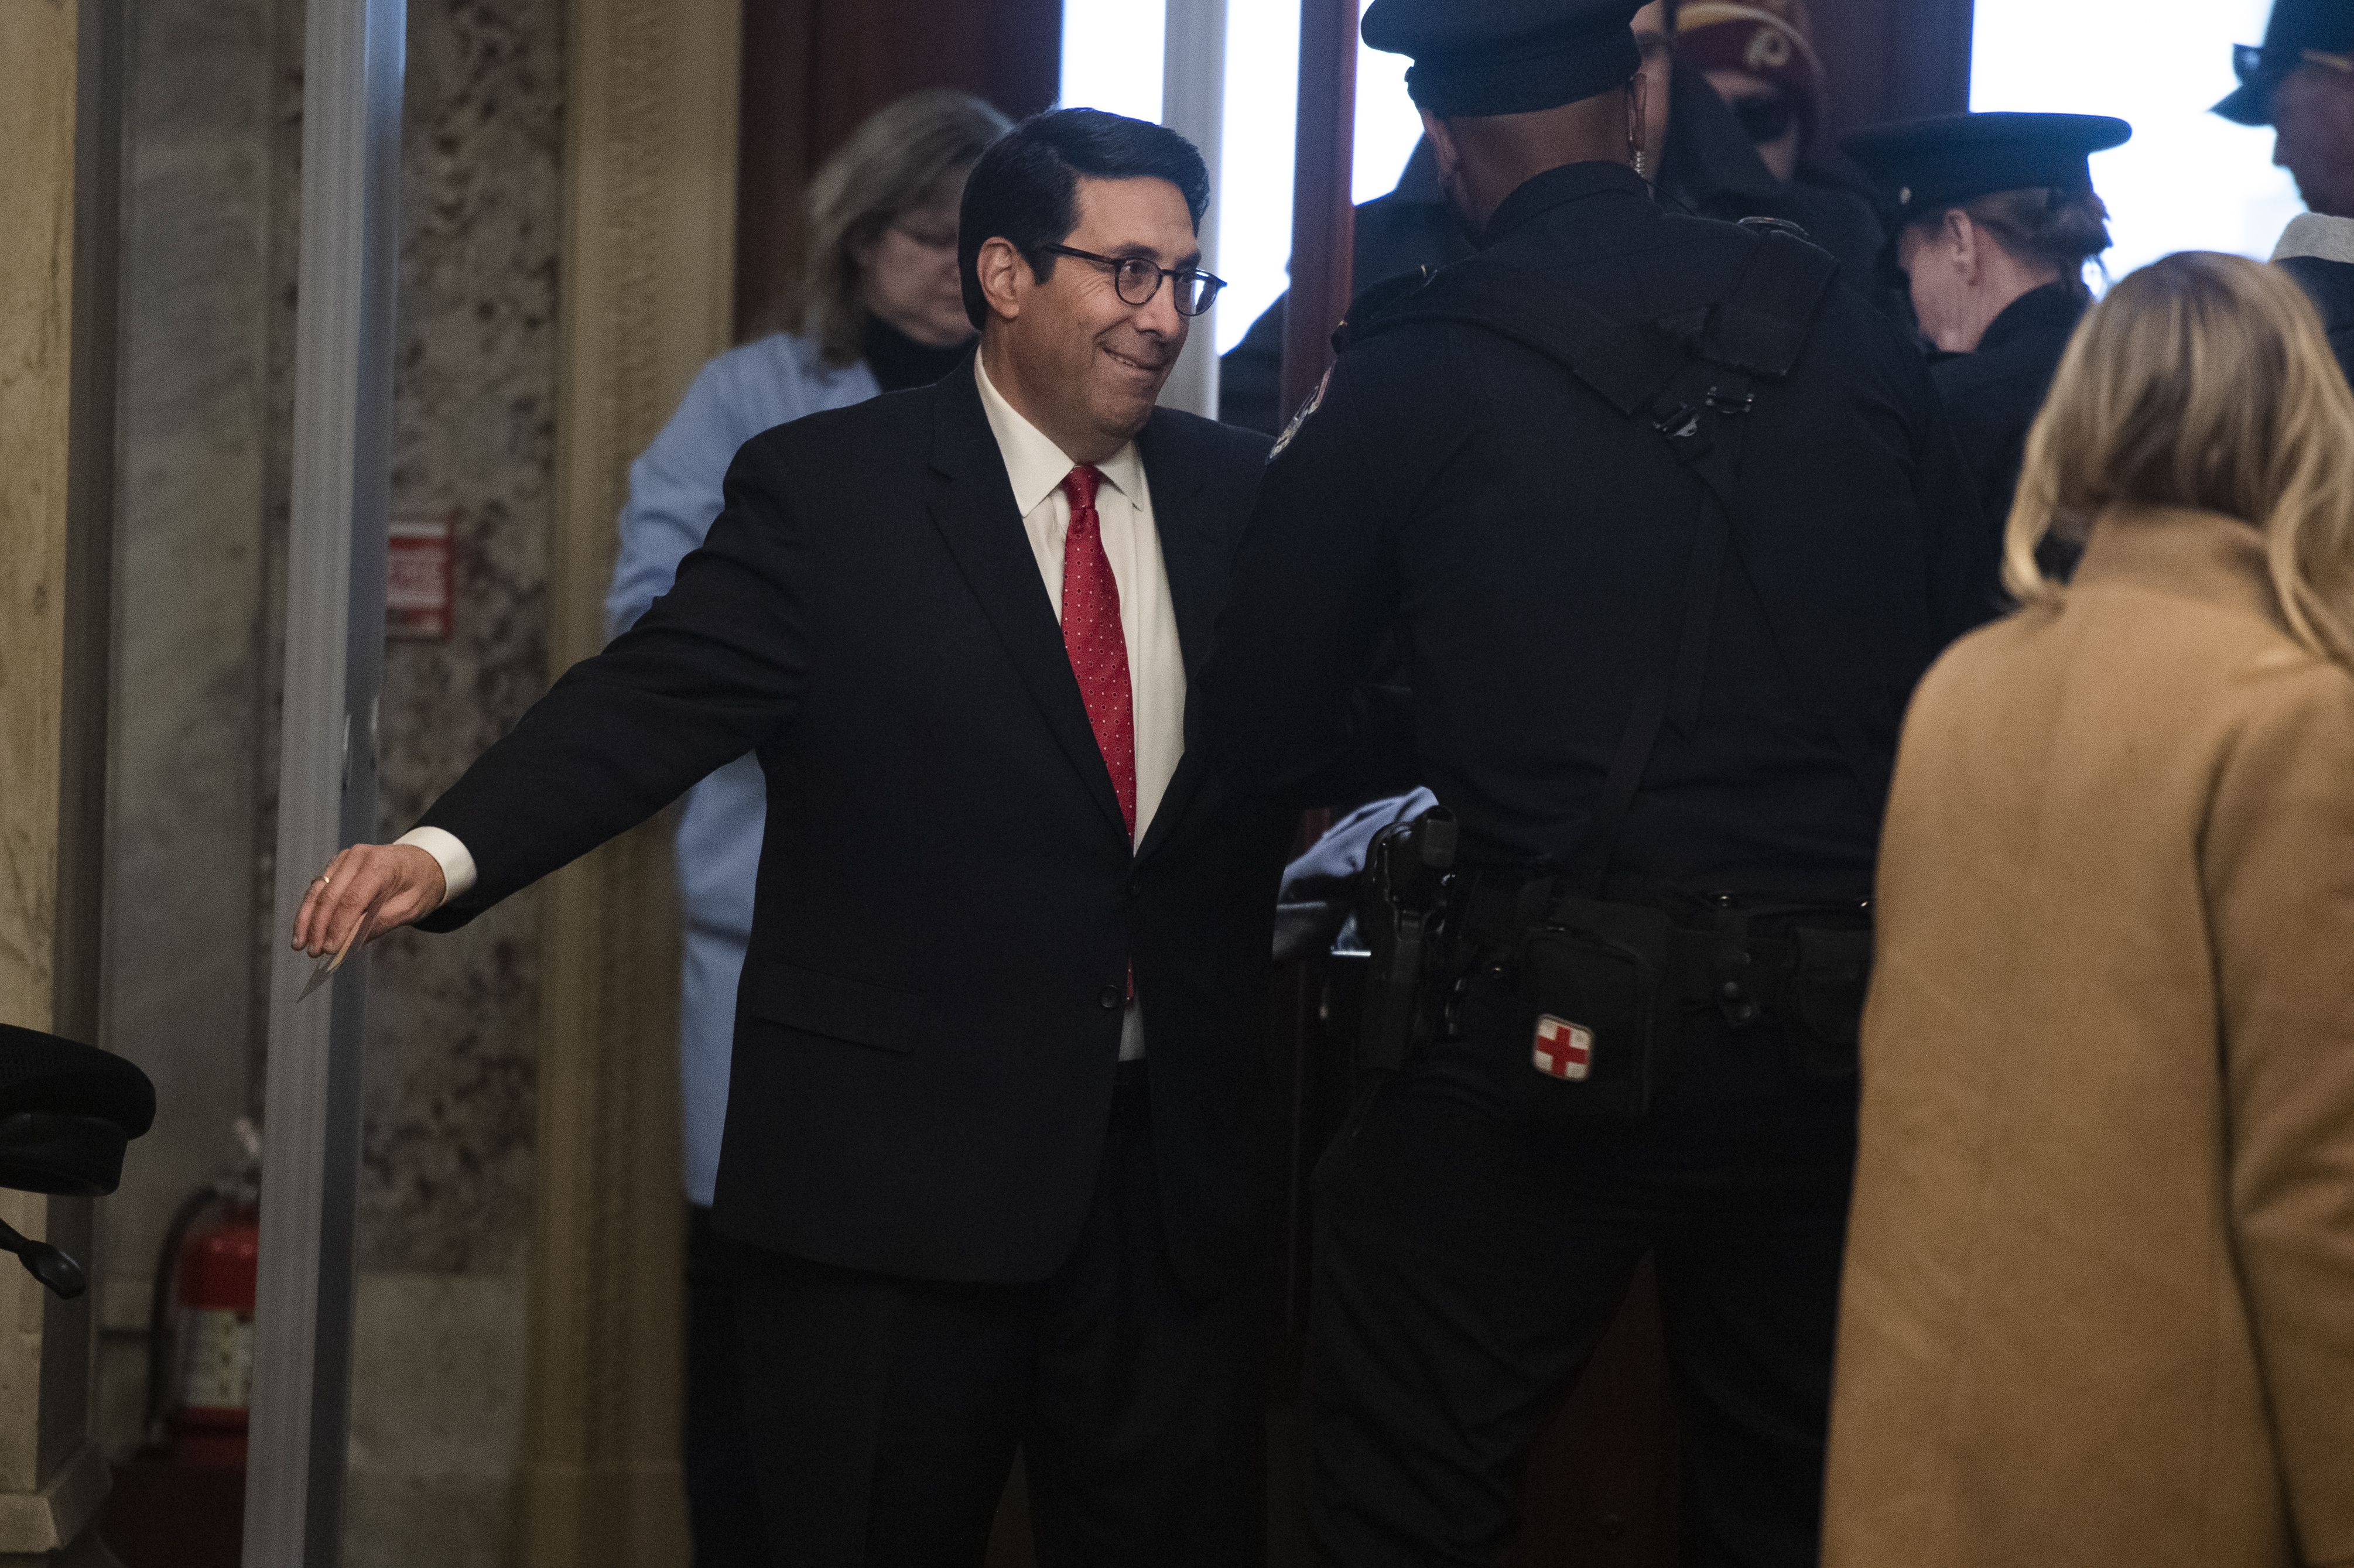 UNITED STATES - JANUARY 21: Jay Sekulow, an attorney for President Donald Trump, arrives to the Capitol for the impeachment trial of Trump on Tuesday, January 21, 2020. (Photo By Tom Williams/CQ Roll Call)